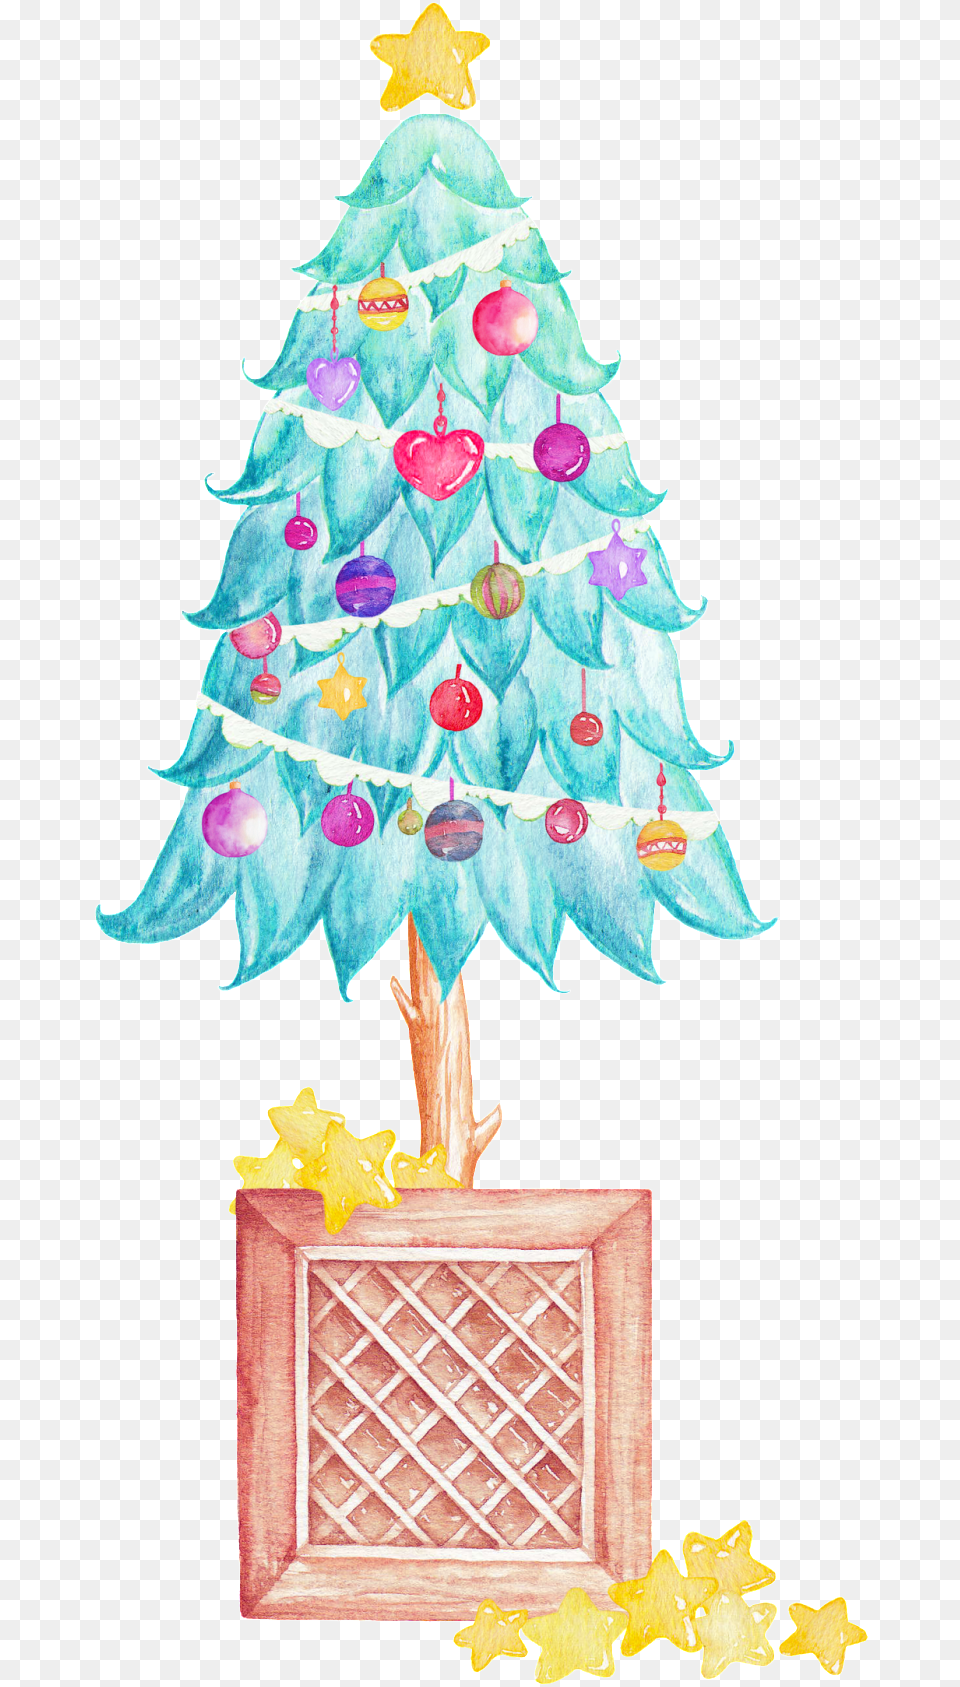 Download Cartoon Cute Christmas Tree Thank Christmas Tree, Lamp, Christmas Decorations, Festival, Adult Png